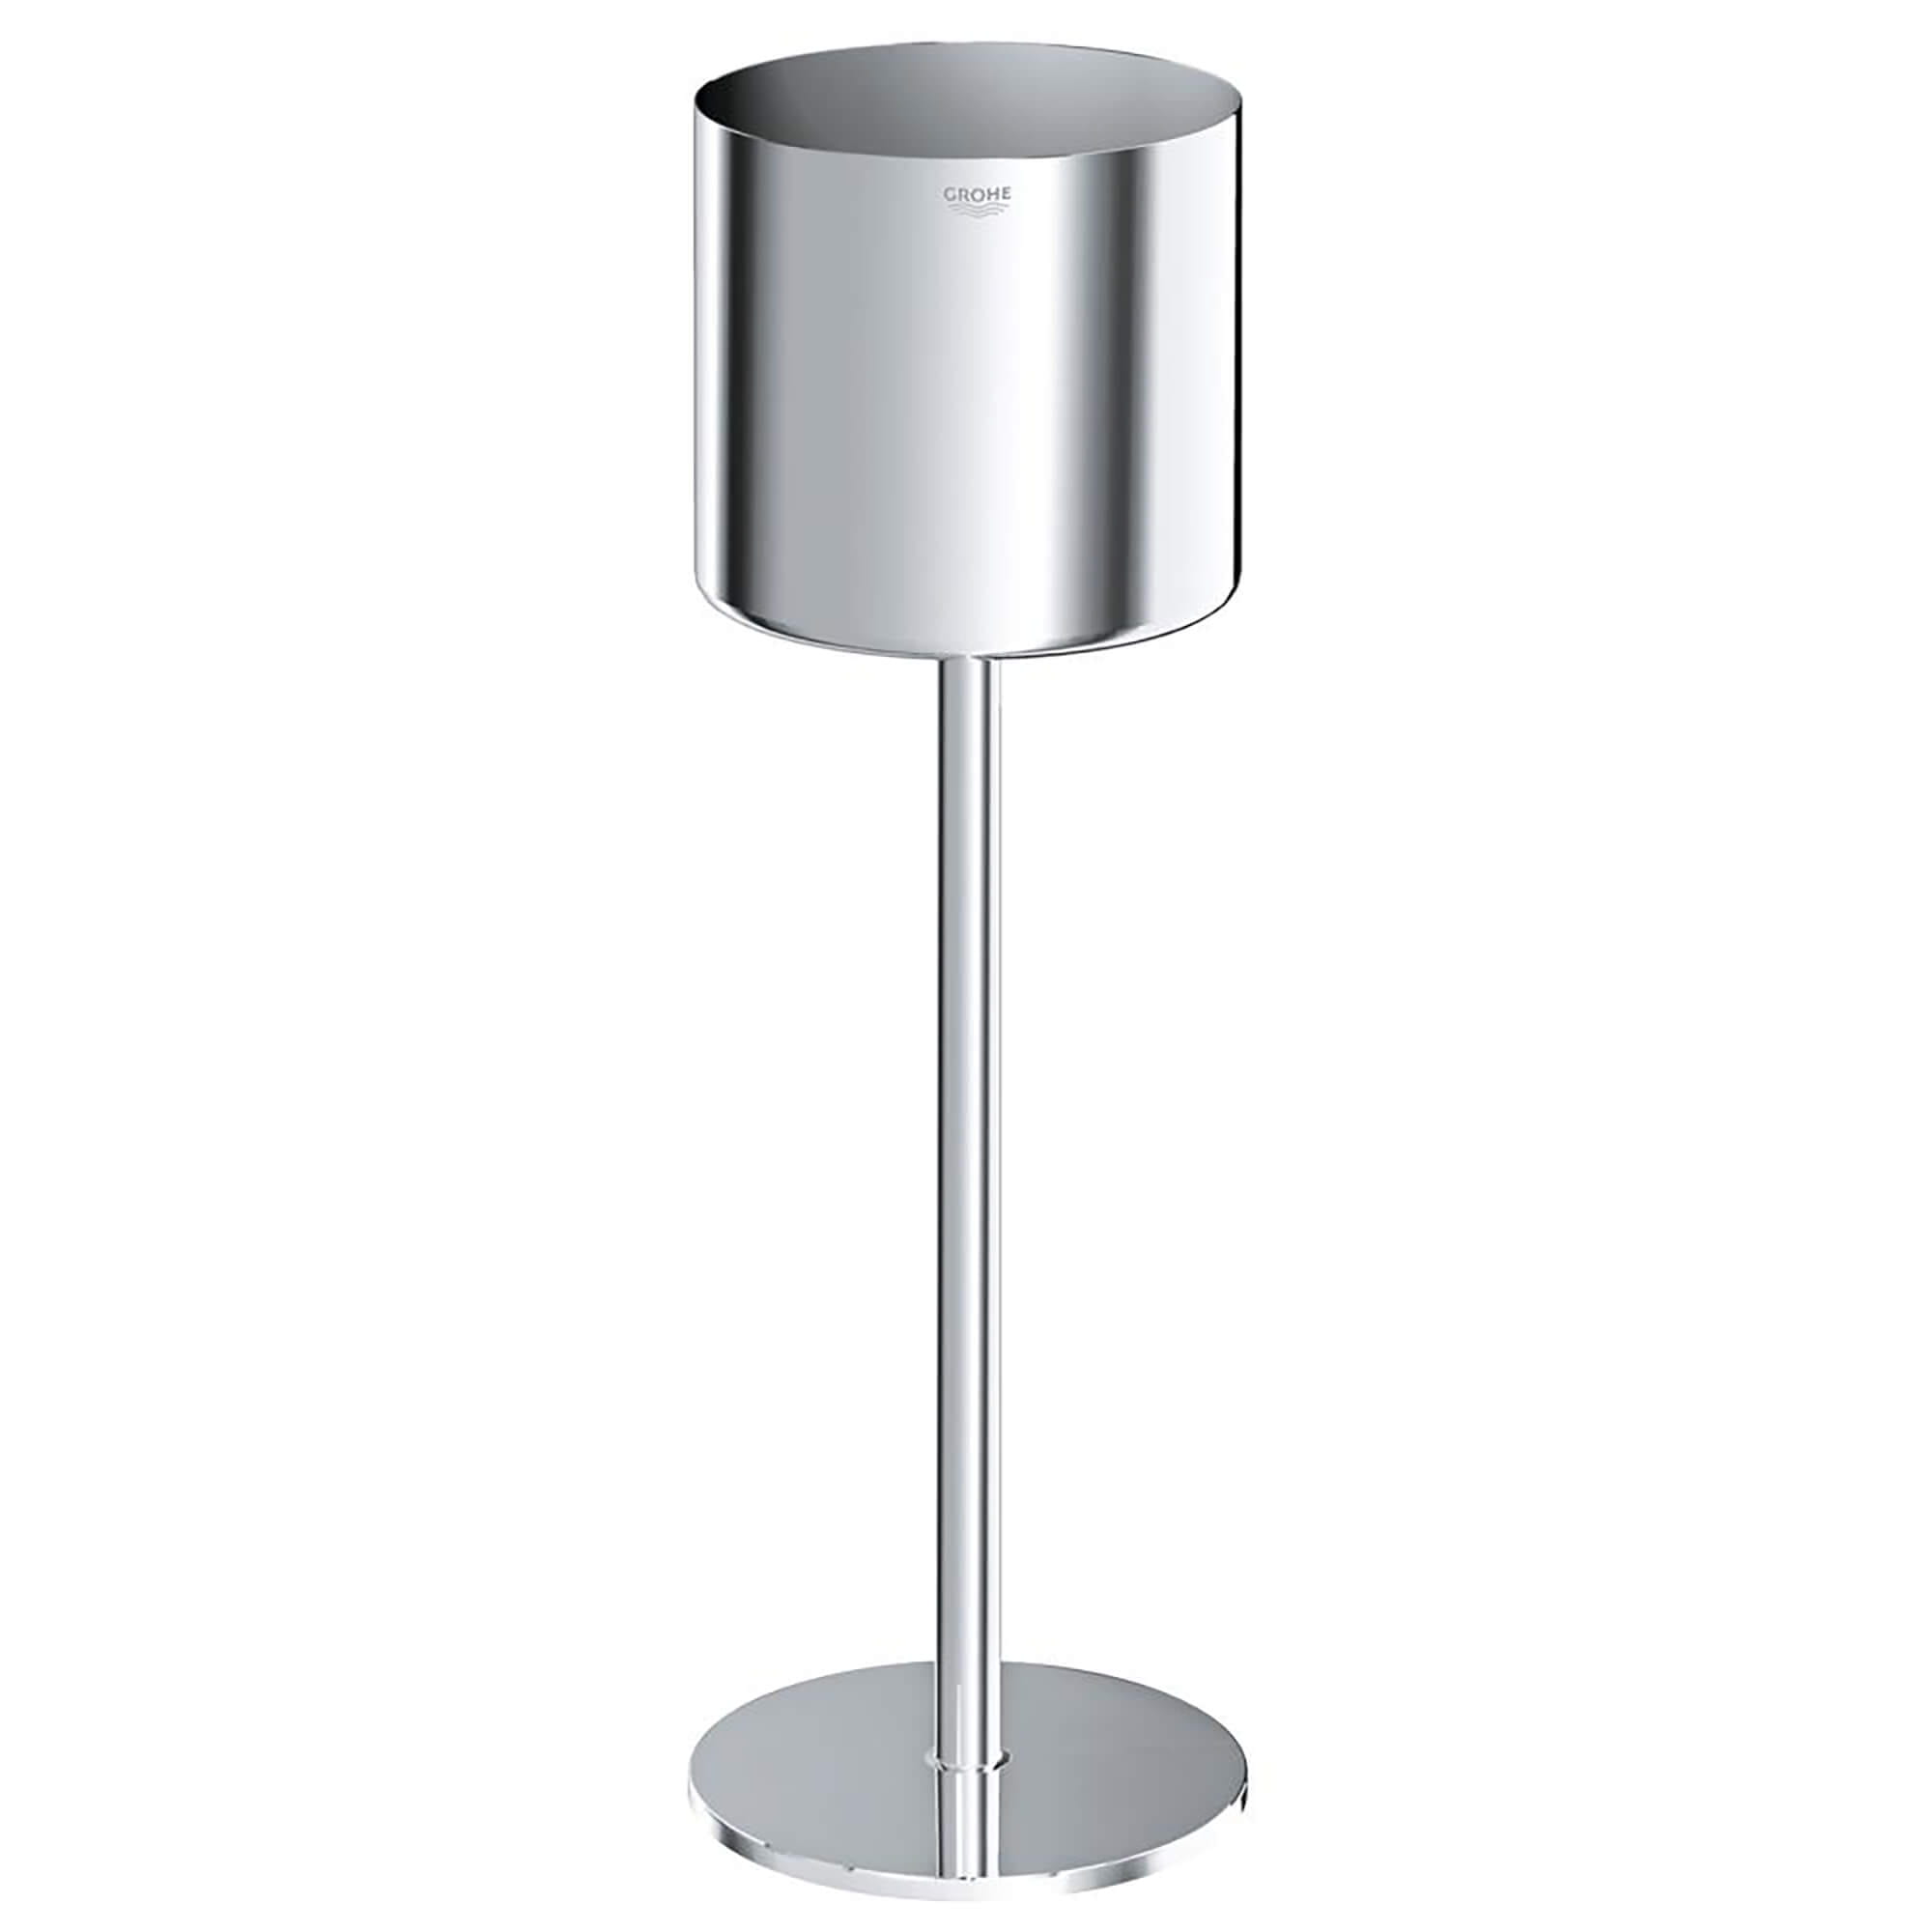 Champagne Bucket GROHE CHROME